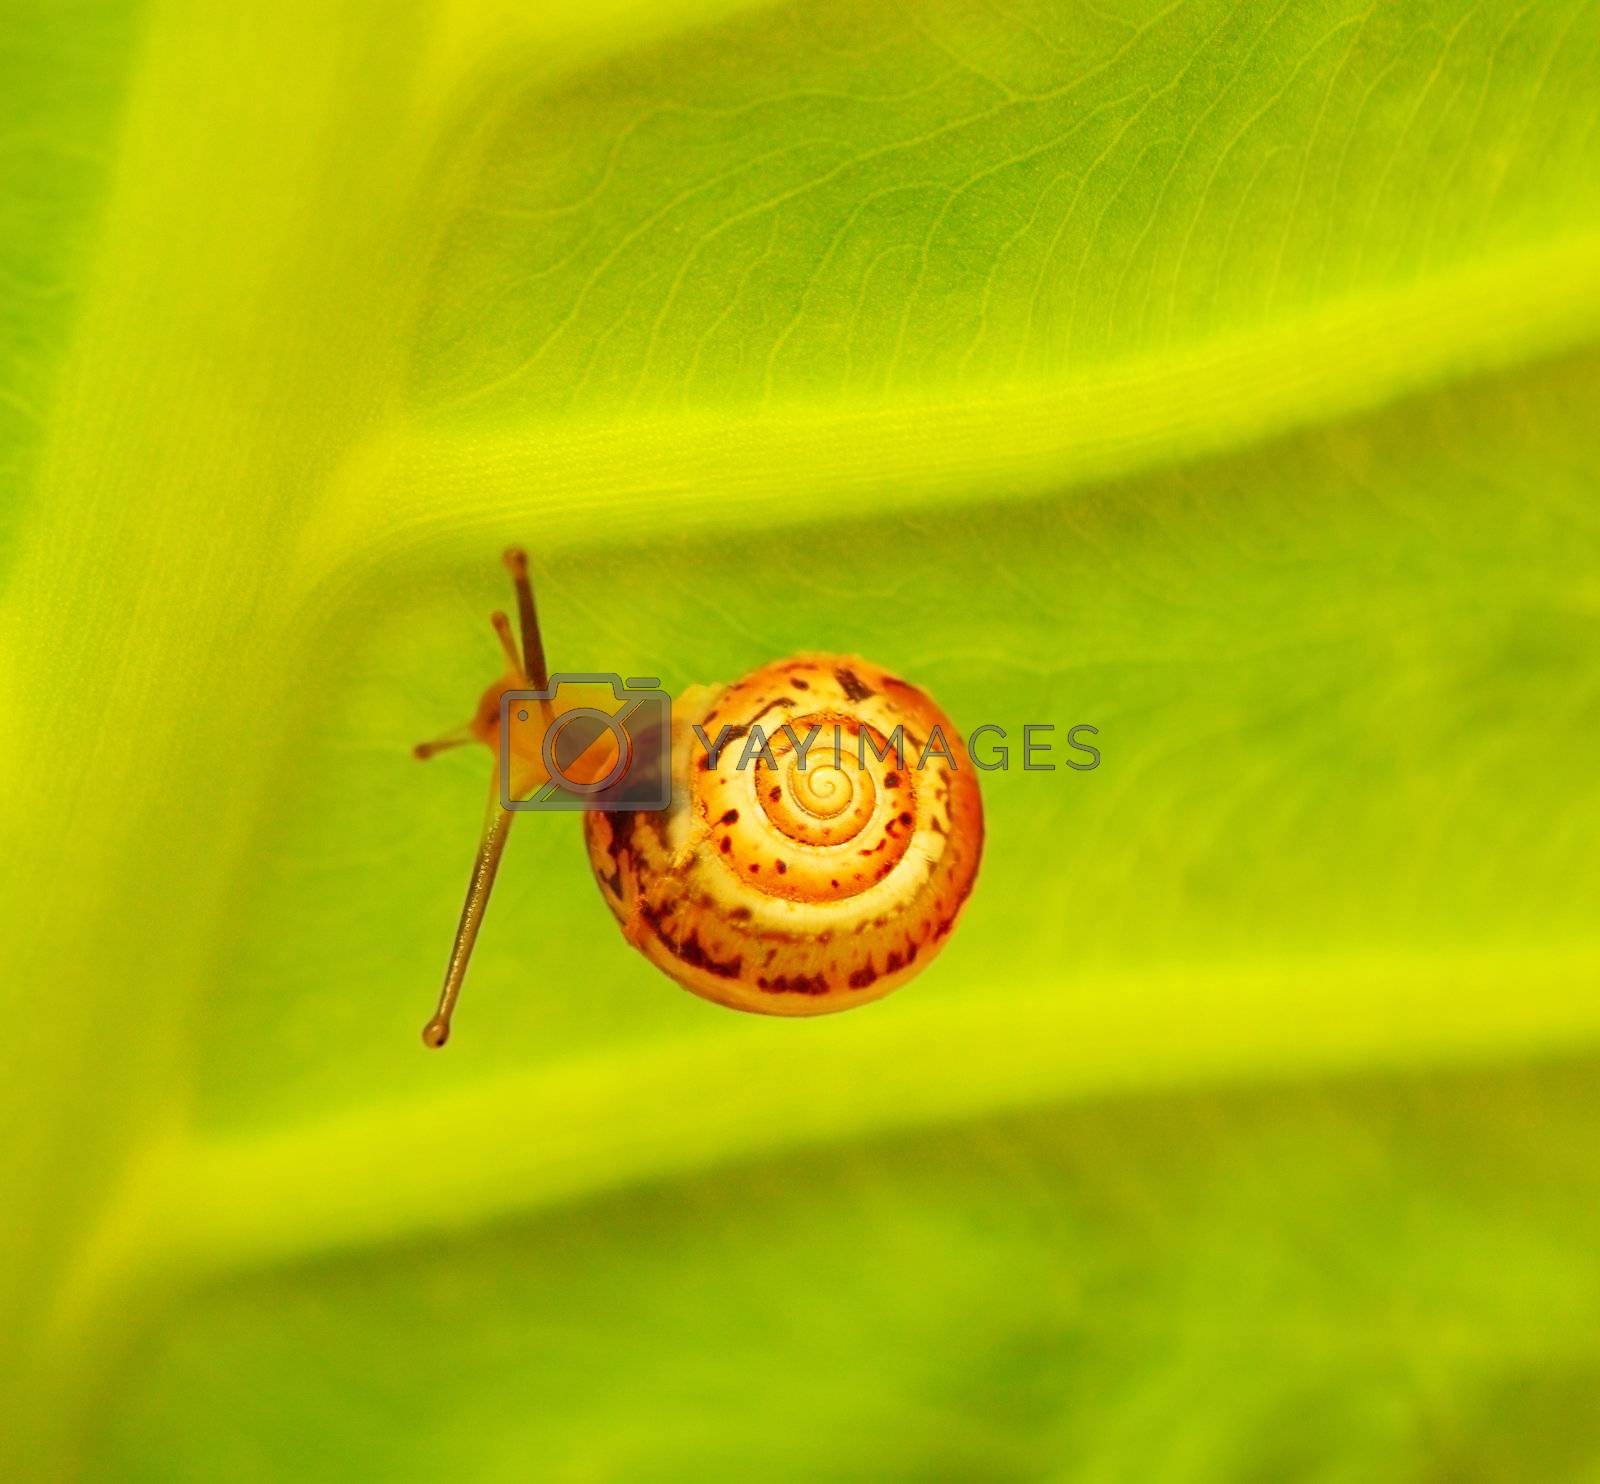 Royalty free image of Little snail  by Anna_Omelchenko